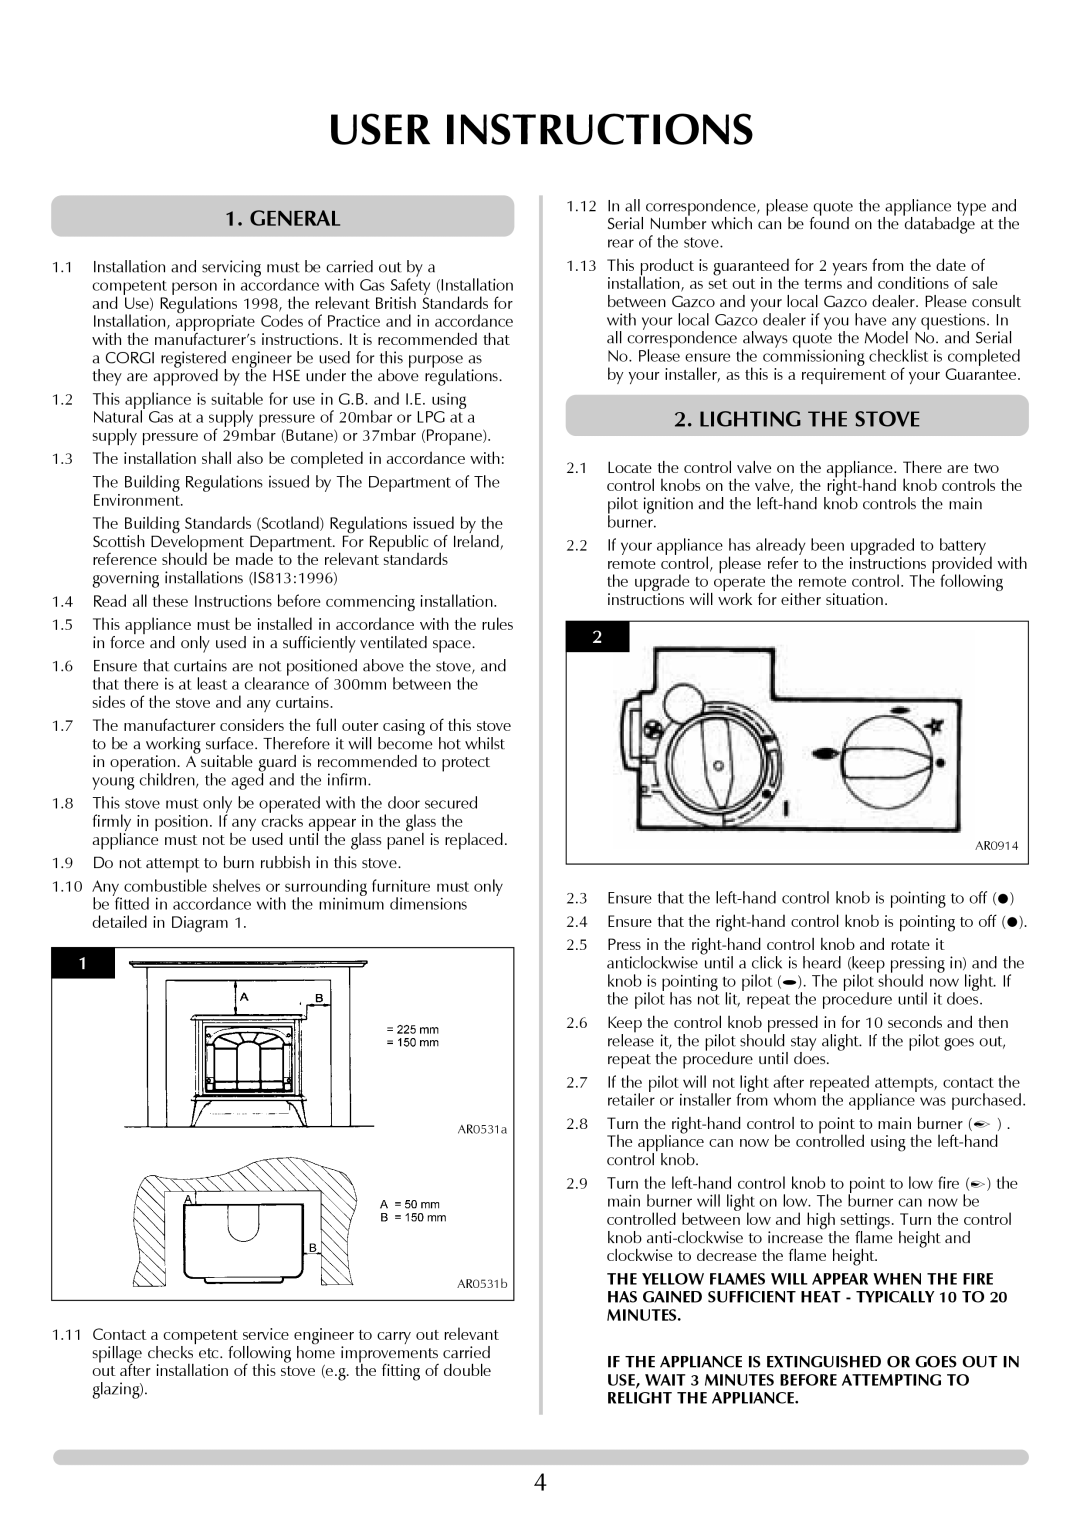 Stovax 705088 manual User Instructions, General, Lighting The Stove 